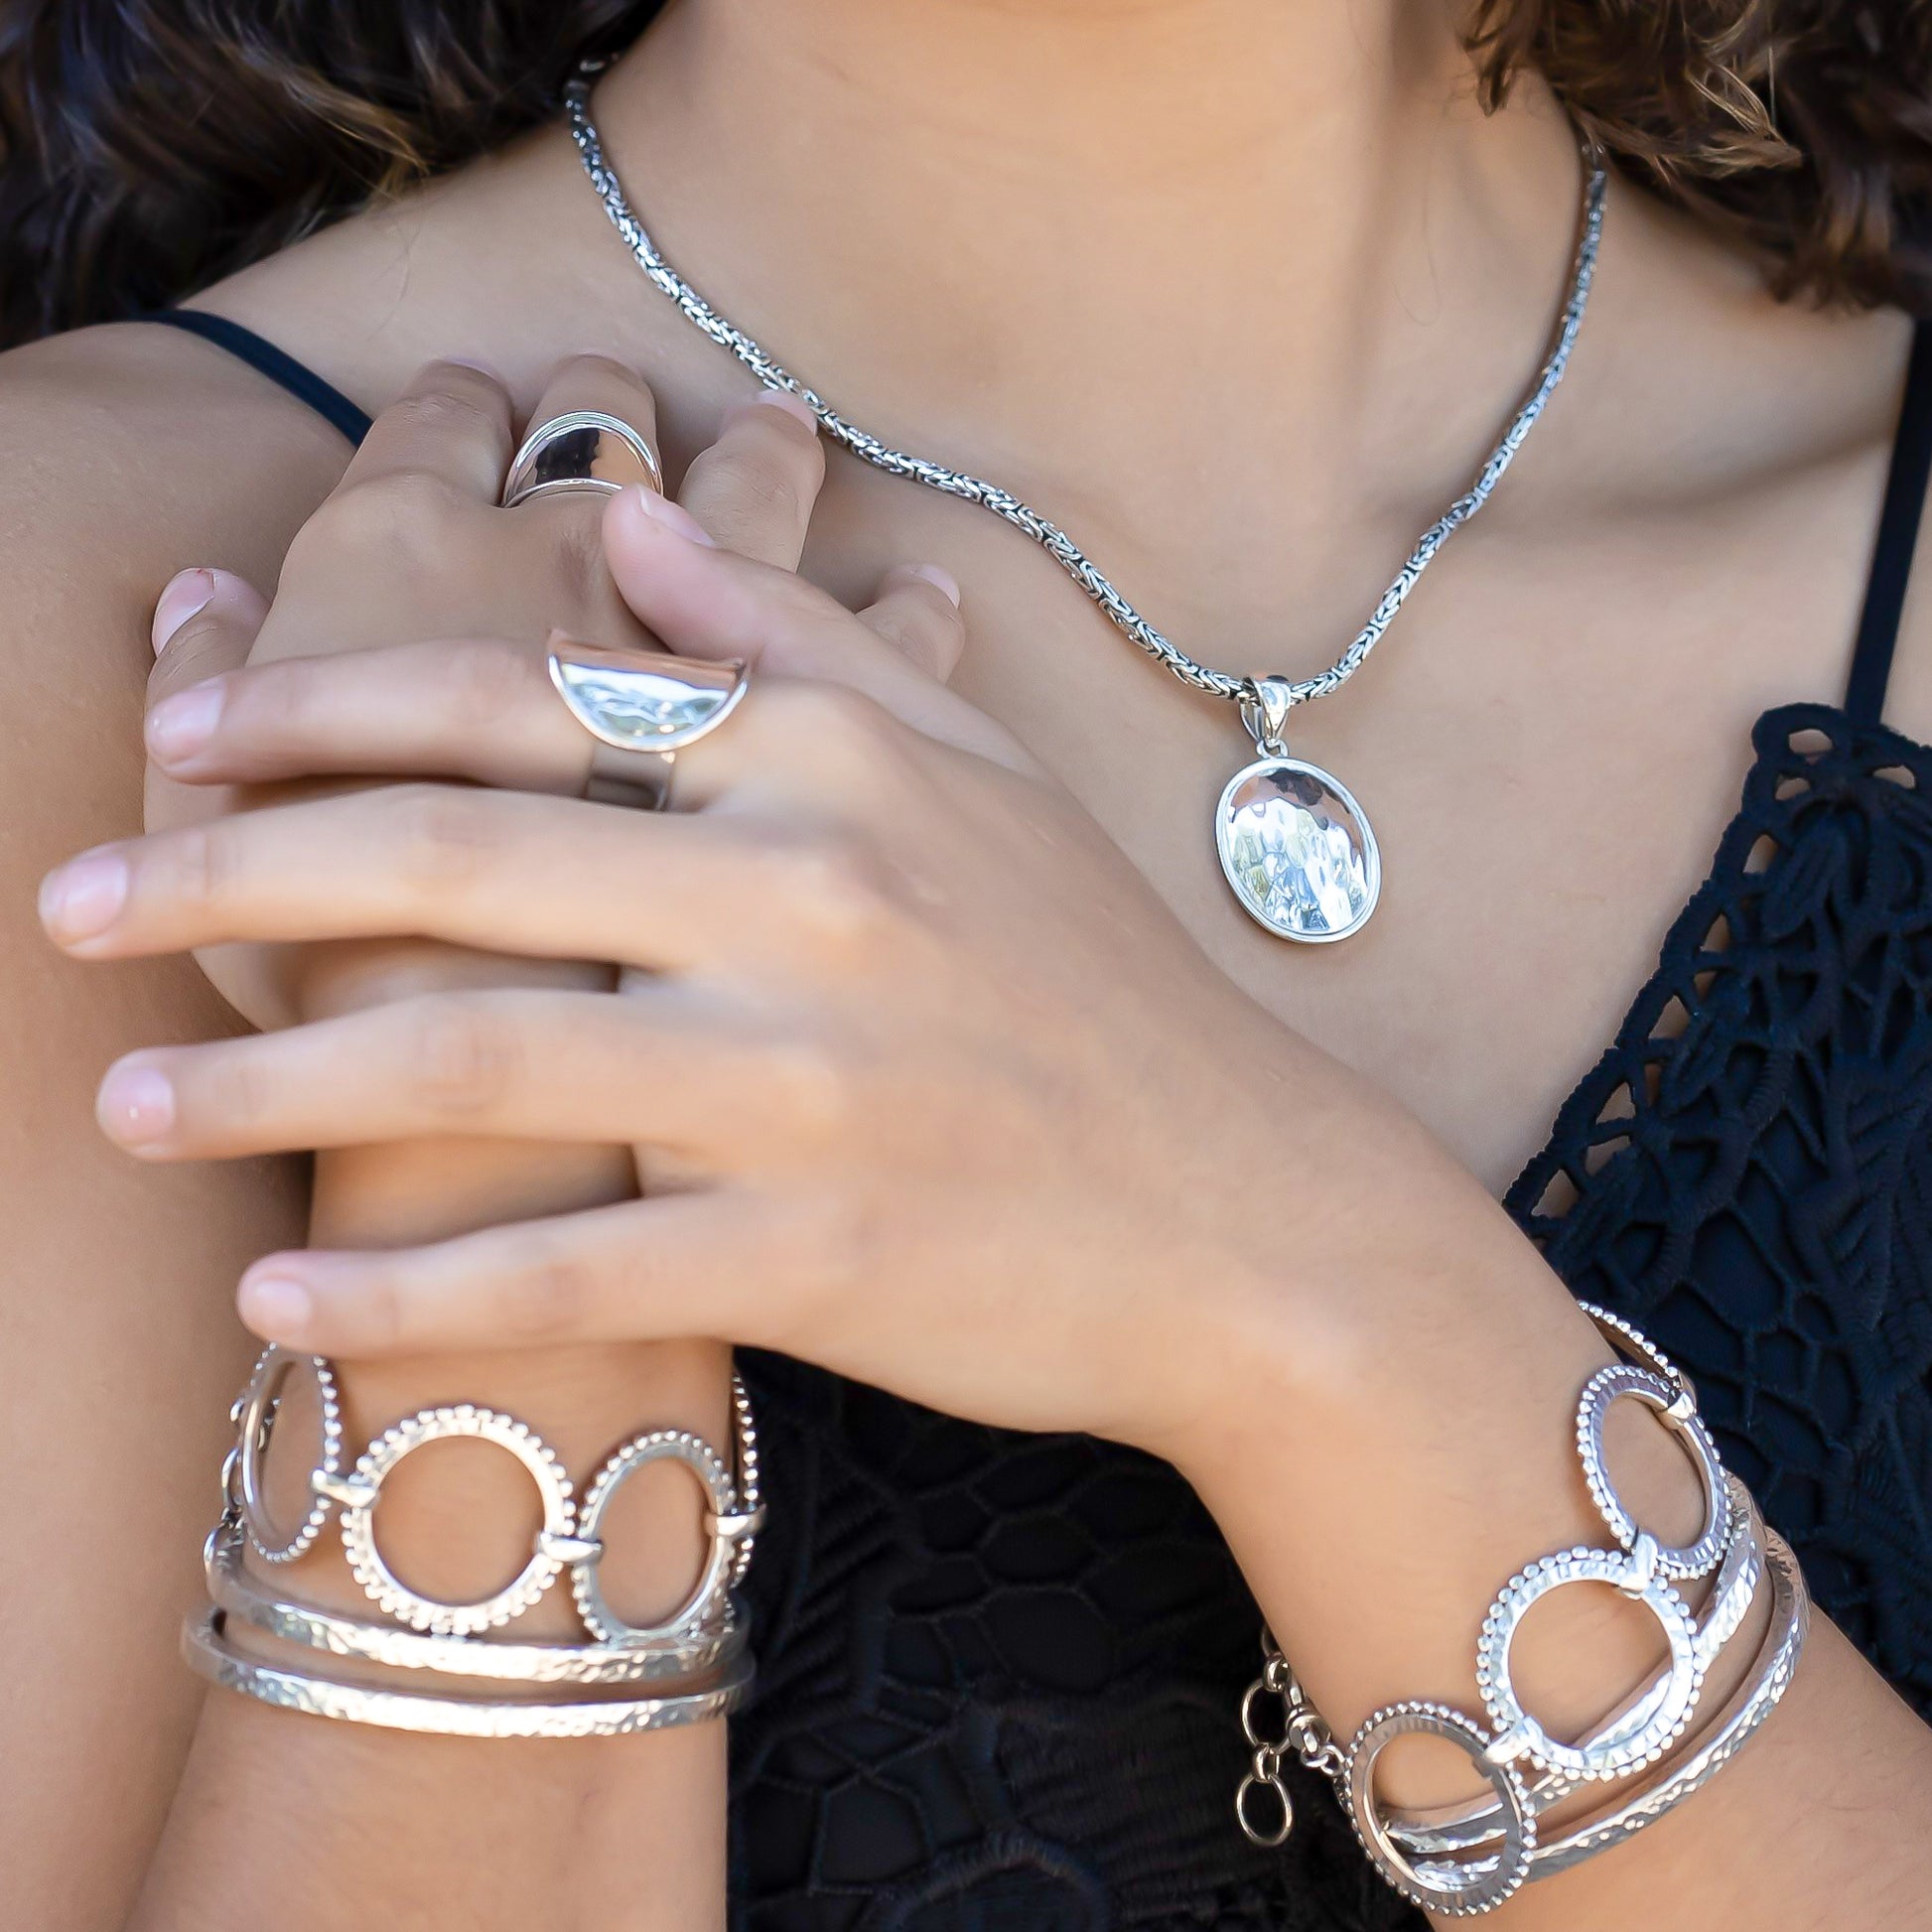 Woman wearing a variety of hammered silver jewelry.